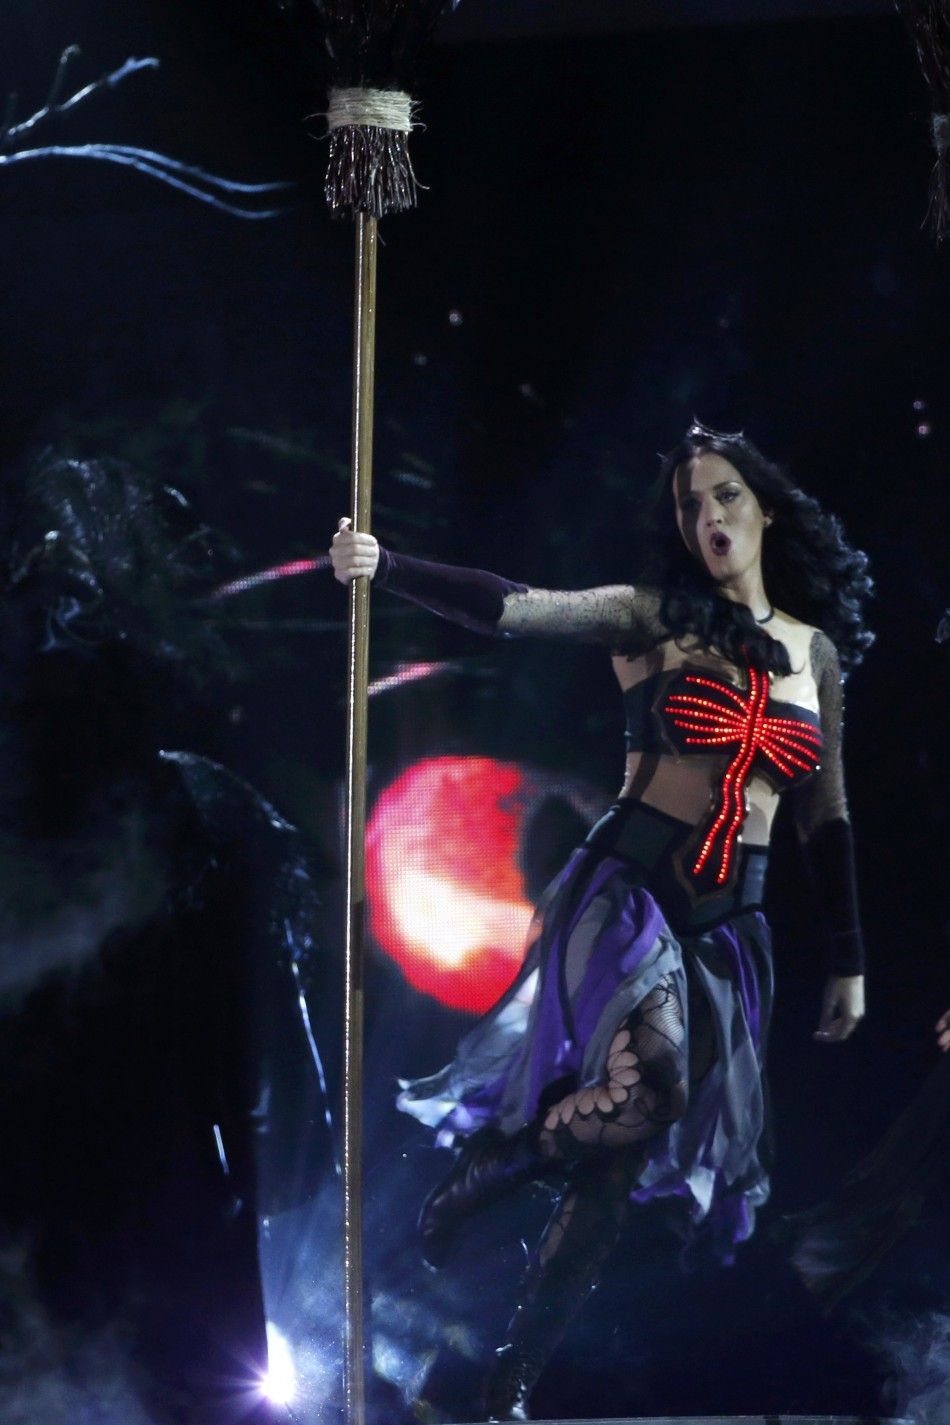 Katy Perry performs quotDark Horsequot at the 56th annual Grammy Awards in Los Angeles, California January 26, 2014.    REUTERSMario Anzuoni UNITED STATES  - Tags ENTERTAINMENT  GRAMMYS-SHOW